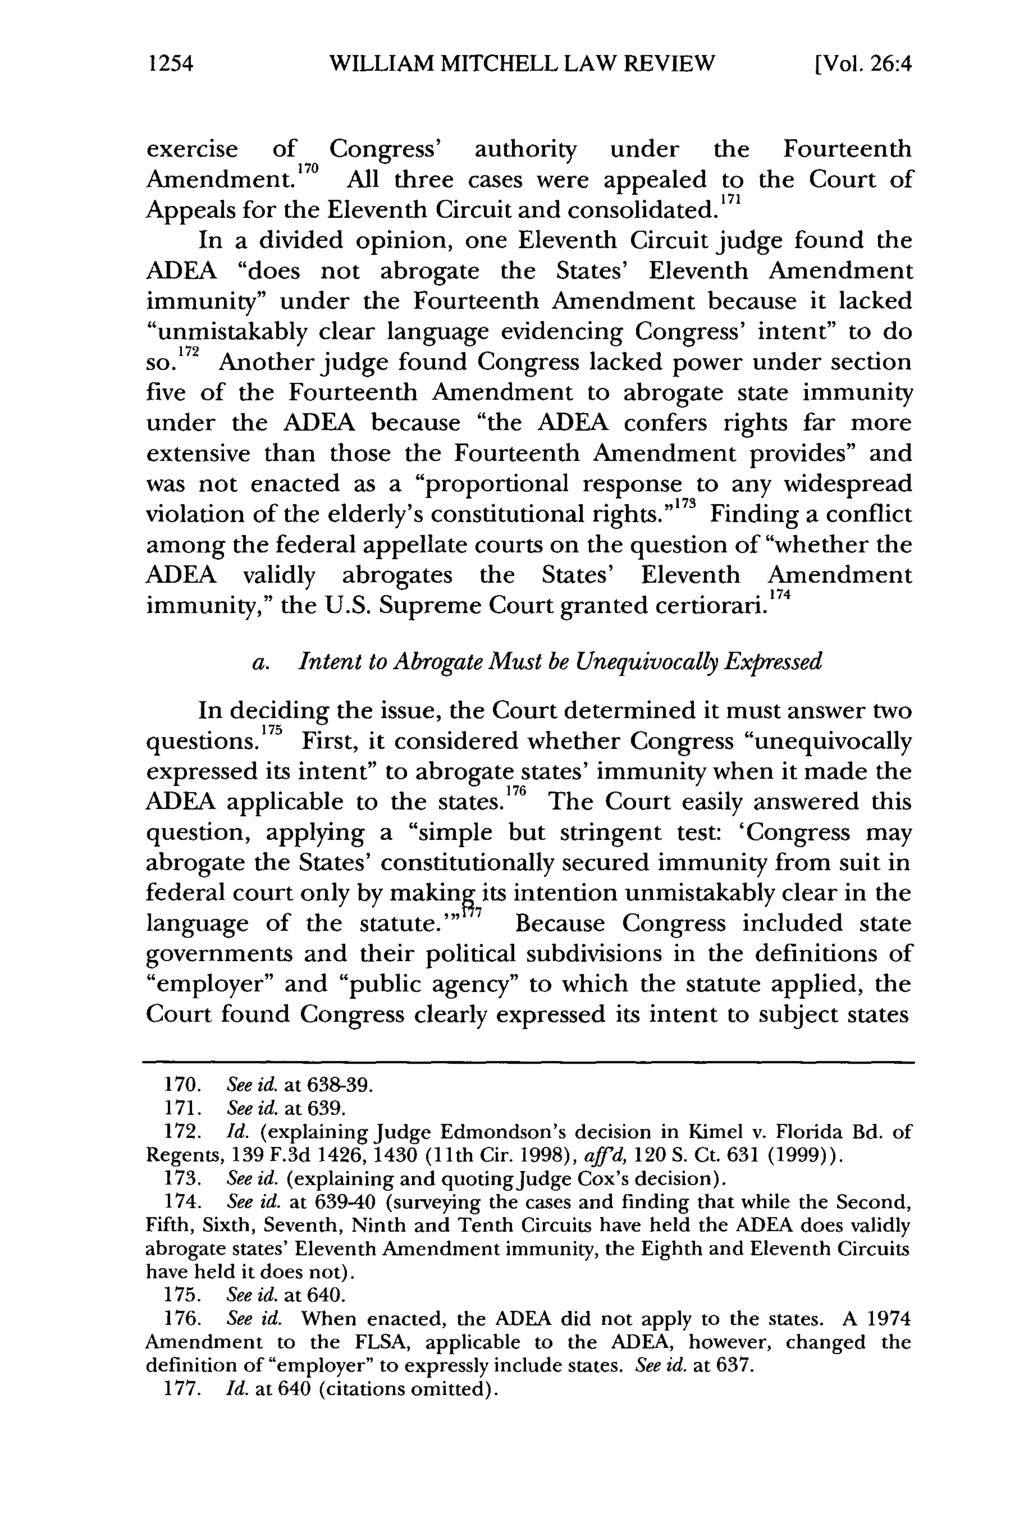 1254 William WILLIAM Mitchell Law MITCHELL Review, Vol. 26, LAW Iss. 4 [2000], REVIEW Art. 12 [Vol. 26:4 exercise of Congress' authority under the Fourteenth Amendment.